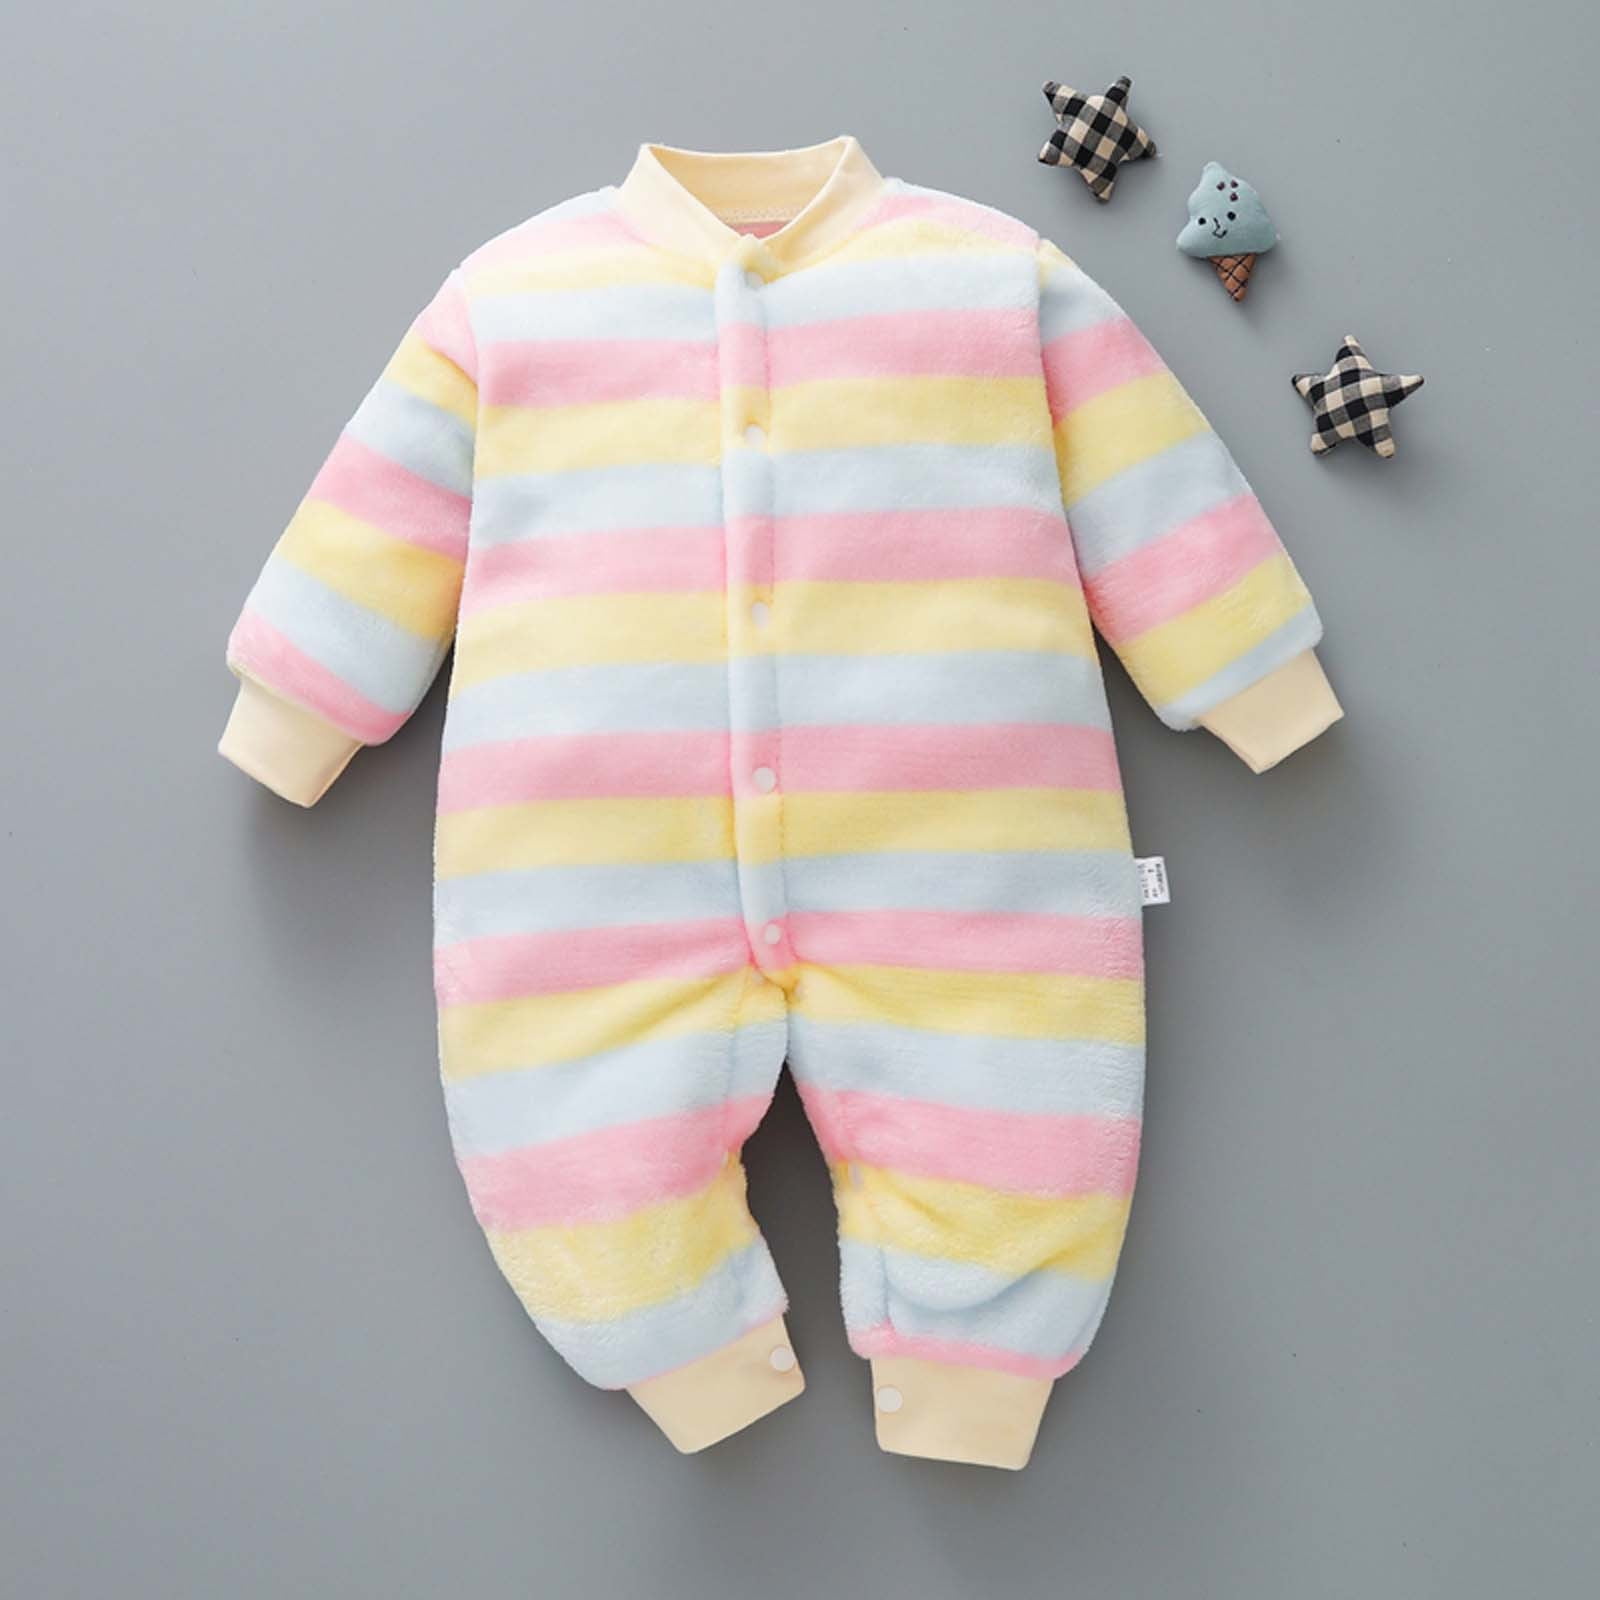 Lolmot Newborn Baby Pajamas with Cuffs, Baby Girls Boys Clothes Gifts ...